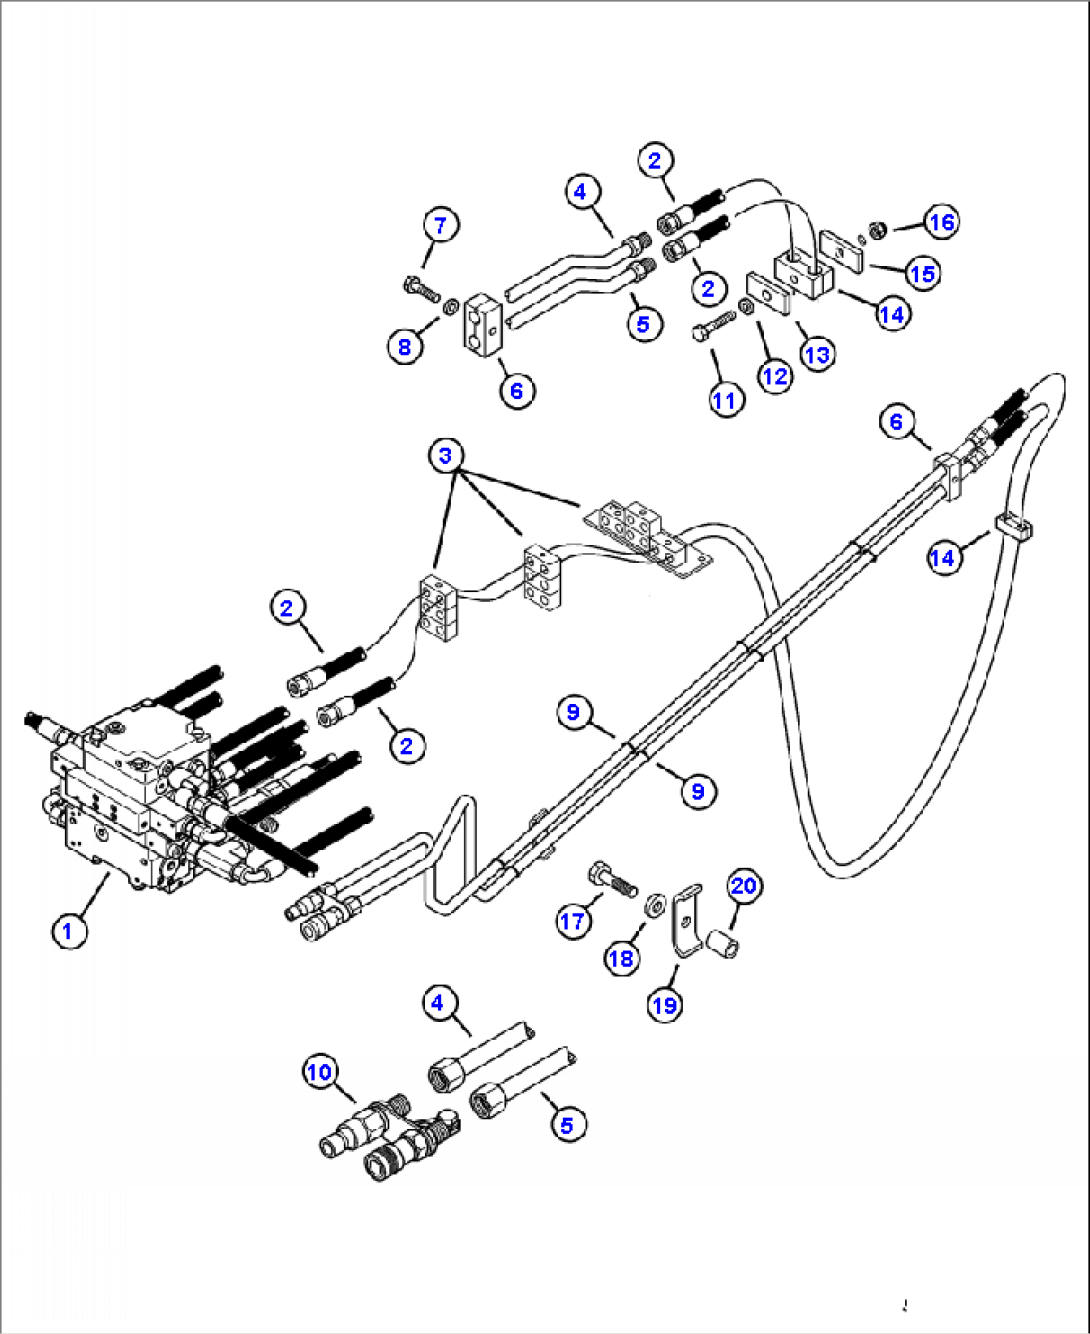 H3010-01A23 HYDRAULIC PIPING - STANDARD FLOW ATTACHMENT LINE - 2 OF 2